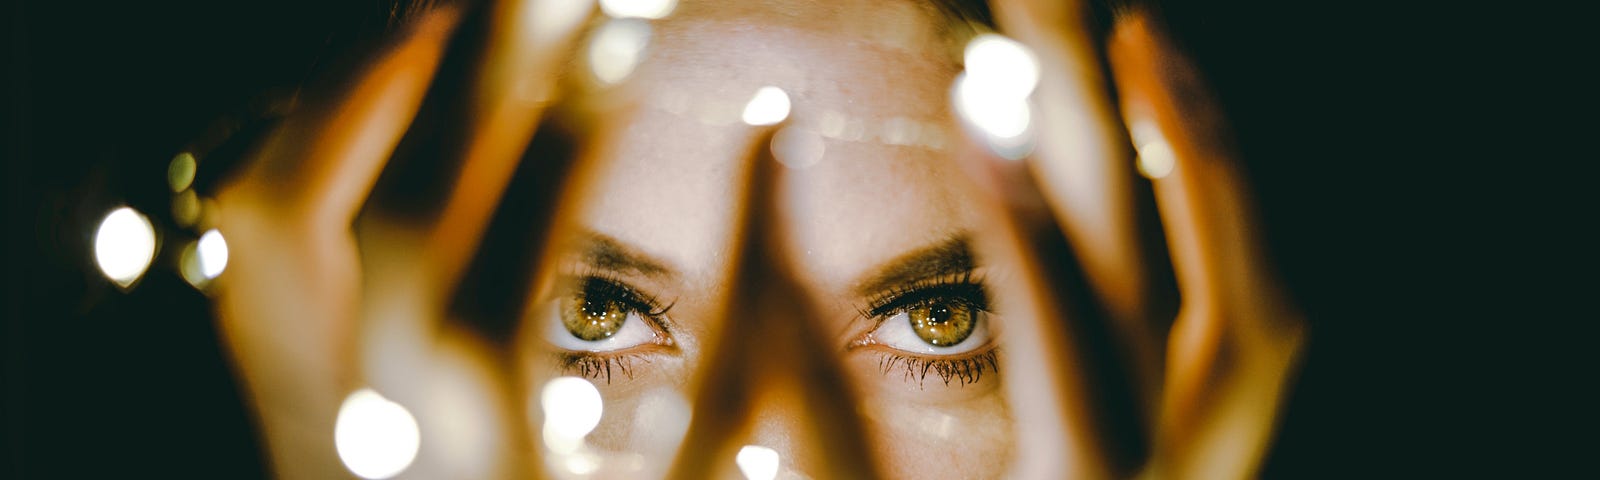 Woman with her hands open around her face with fairy lights wrapped around her hands. Focus is on her hazel eyes.